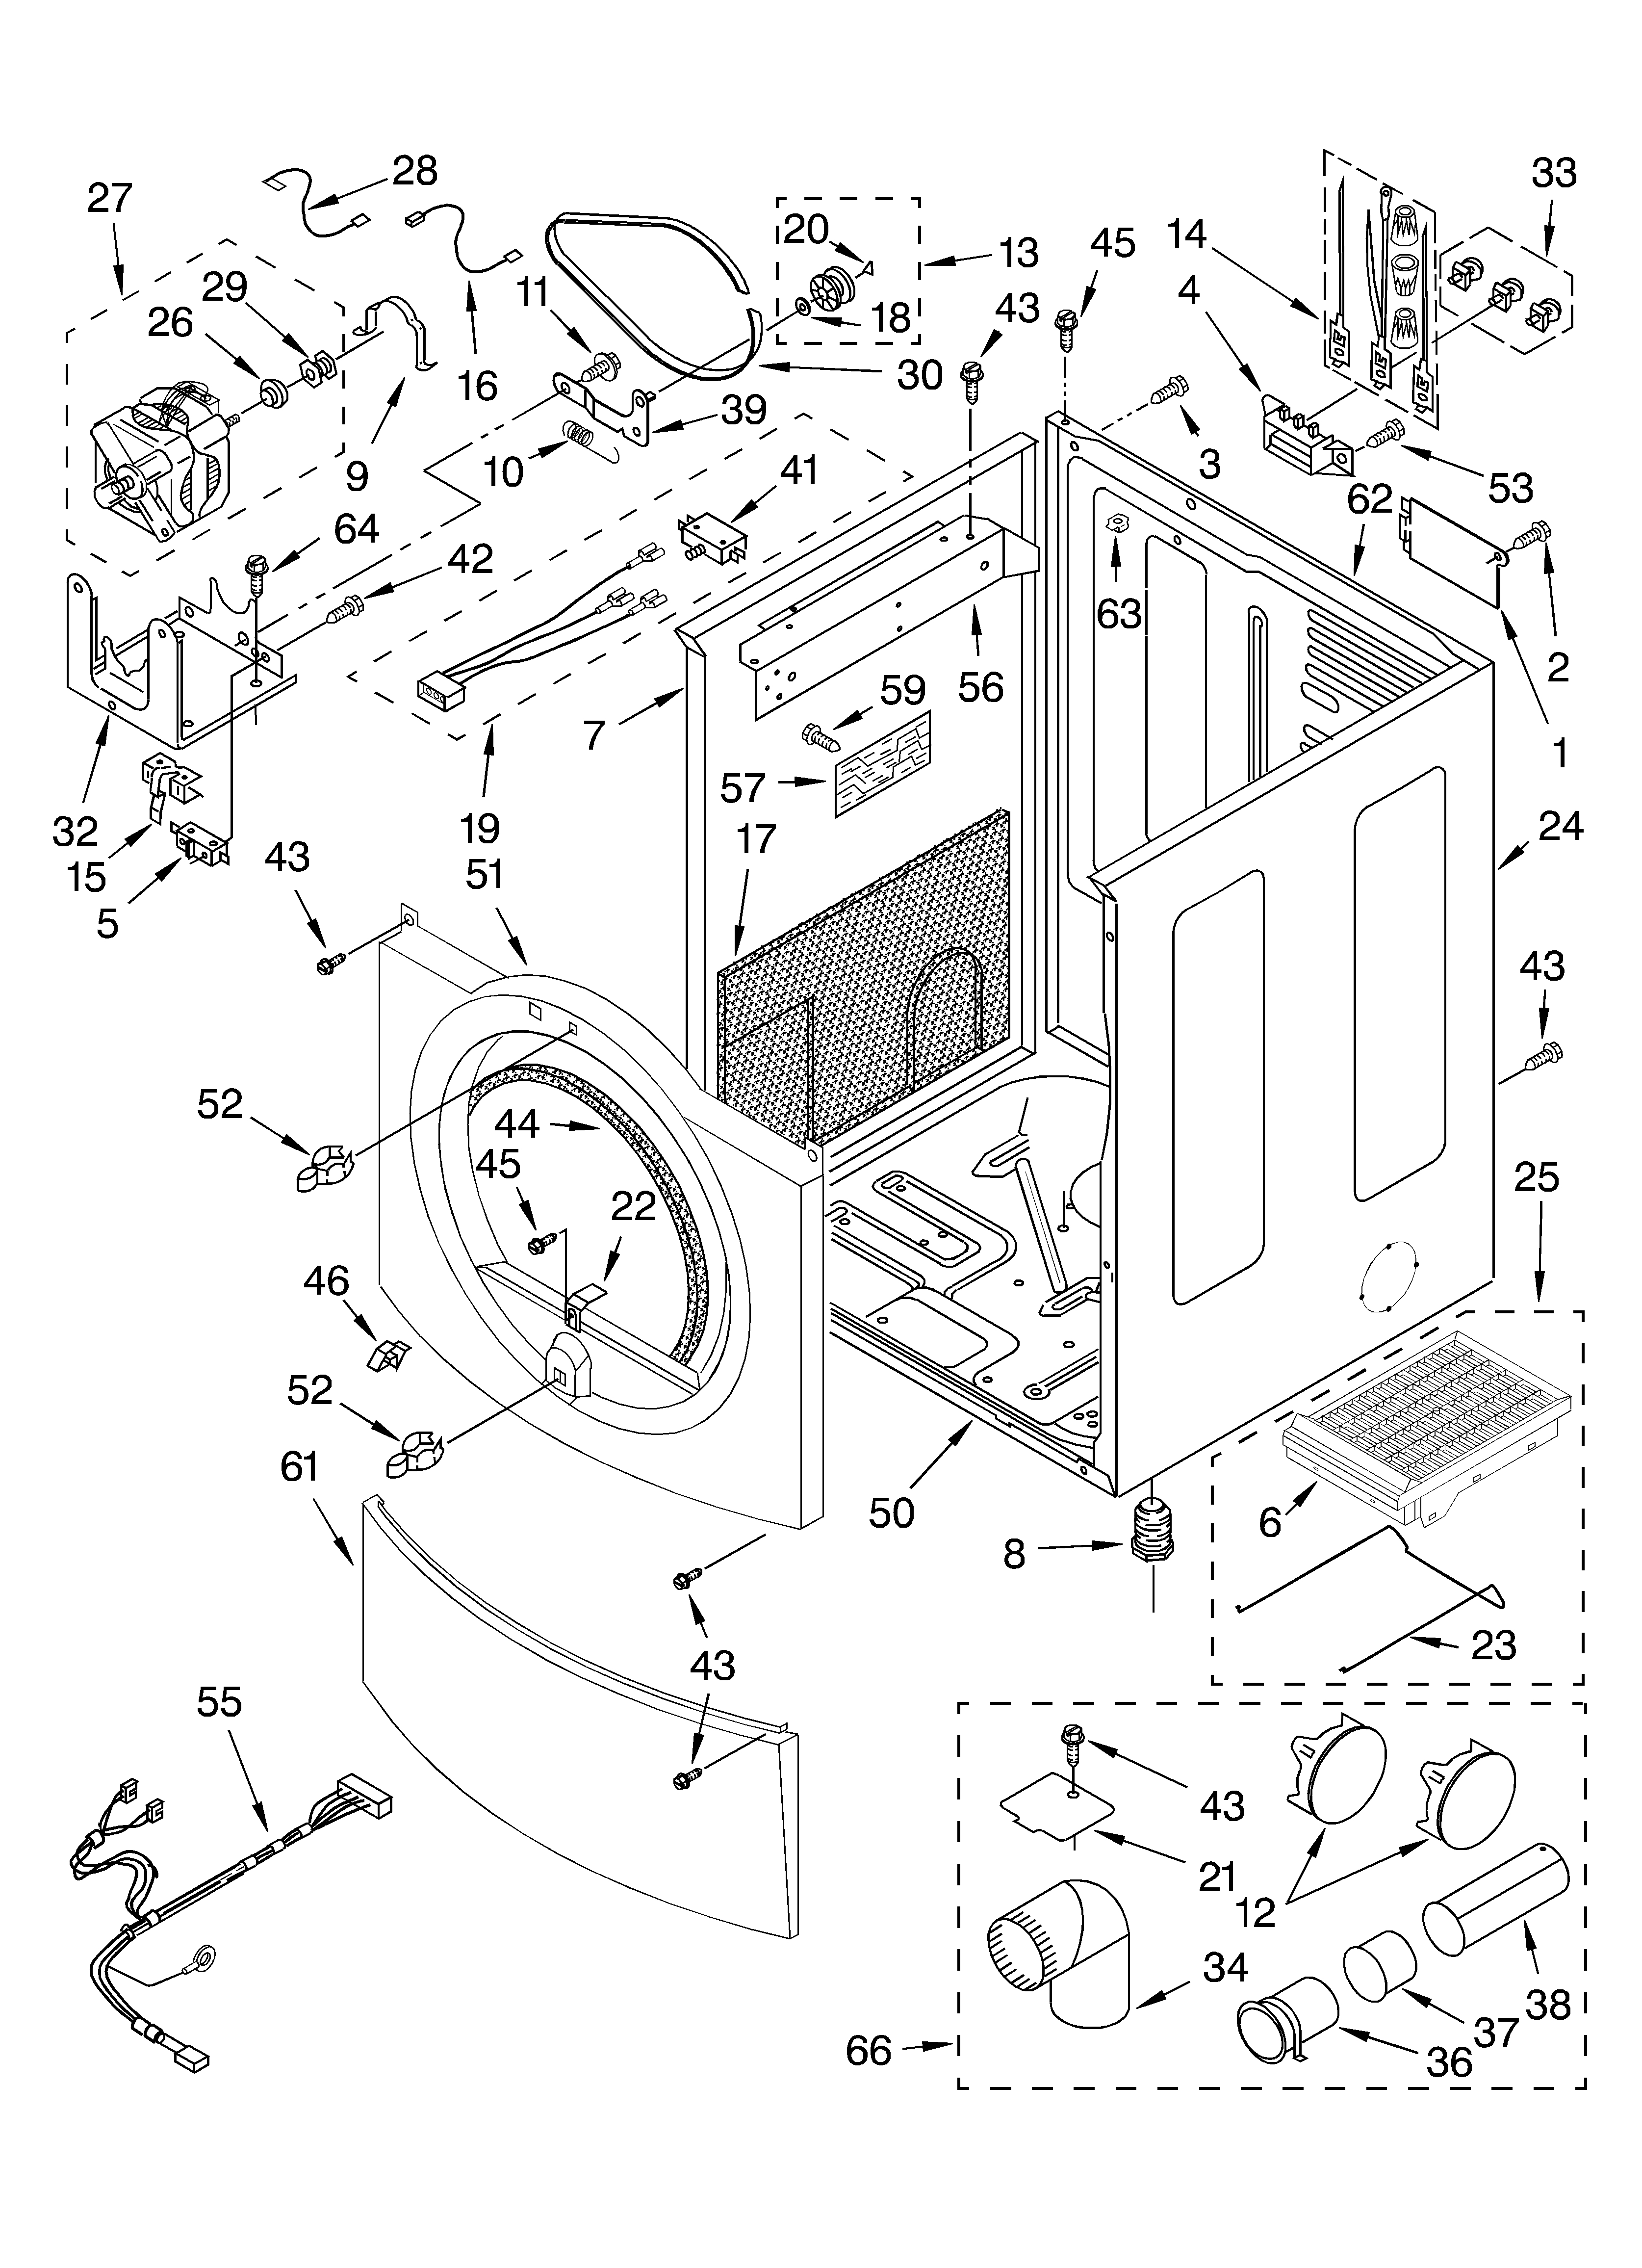 Appliance Repair - How To Read Schematics Diagram Kenmore/whirlpool